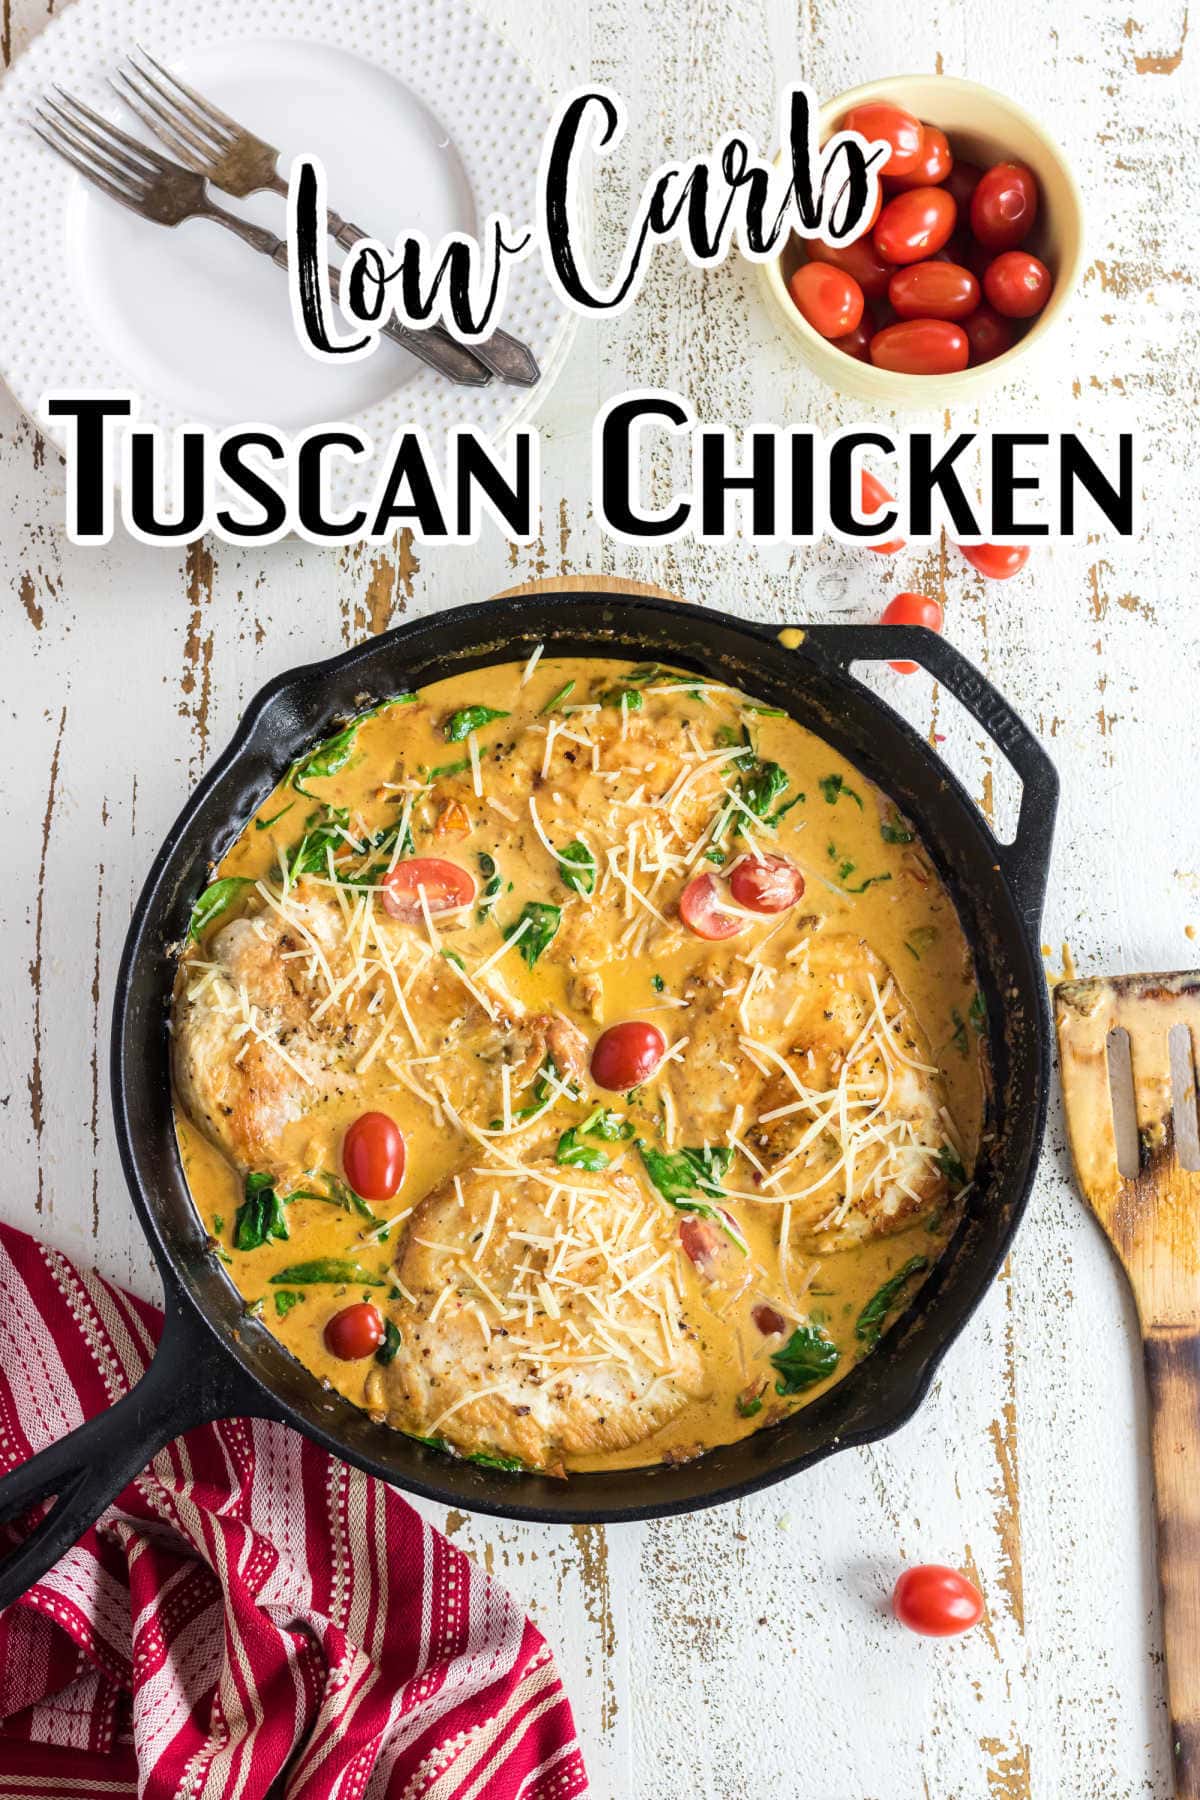 Overhead view of Tuscan chicken in a skillet with title text overlay.